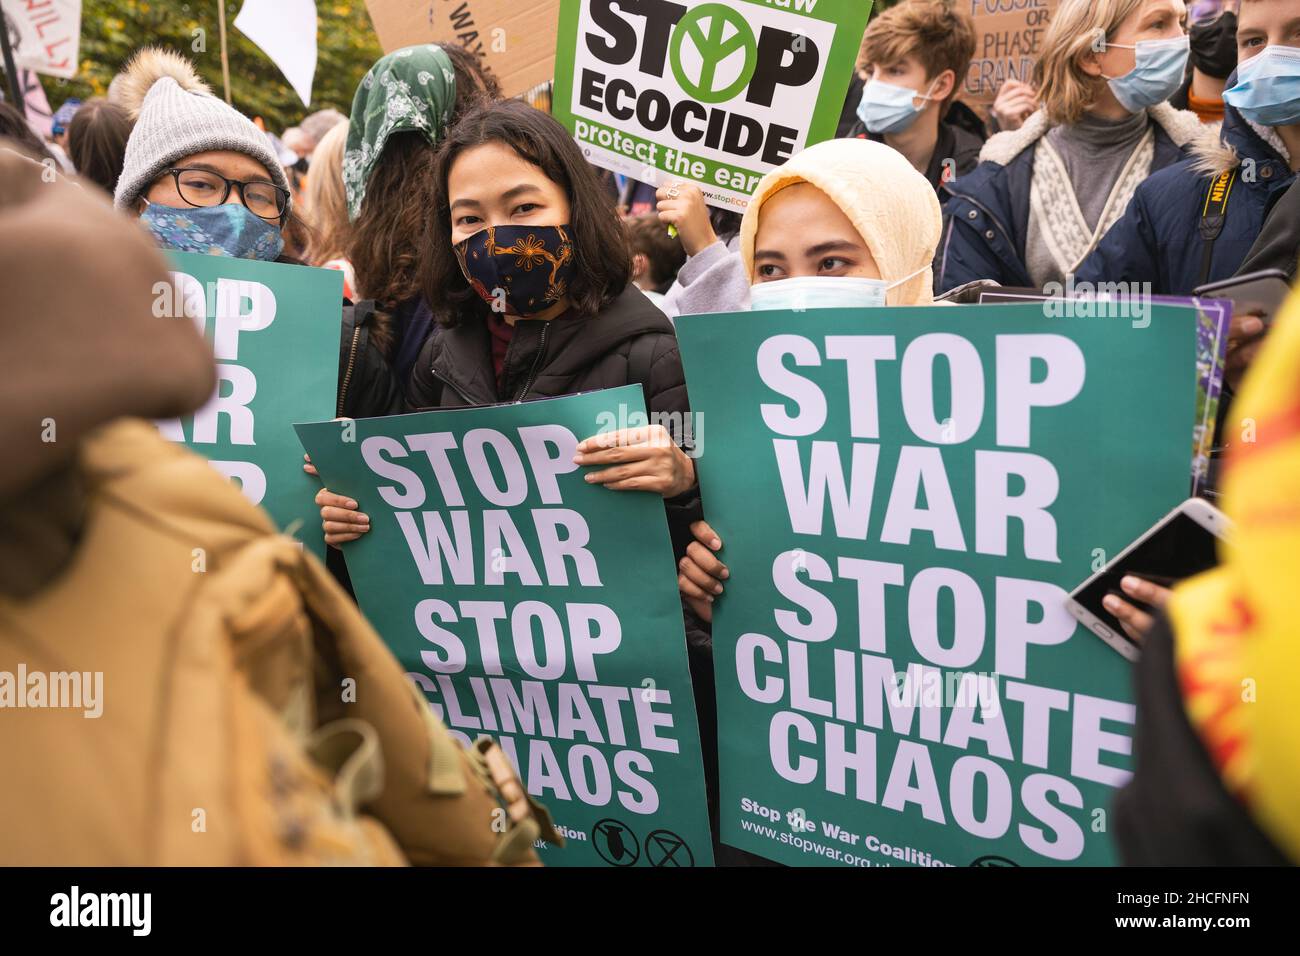 Three women holding climate change posters saying 'Stop war Stop climate chaos' at a protest Stock Photo